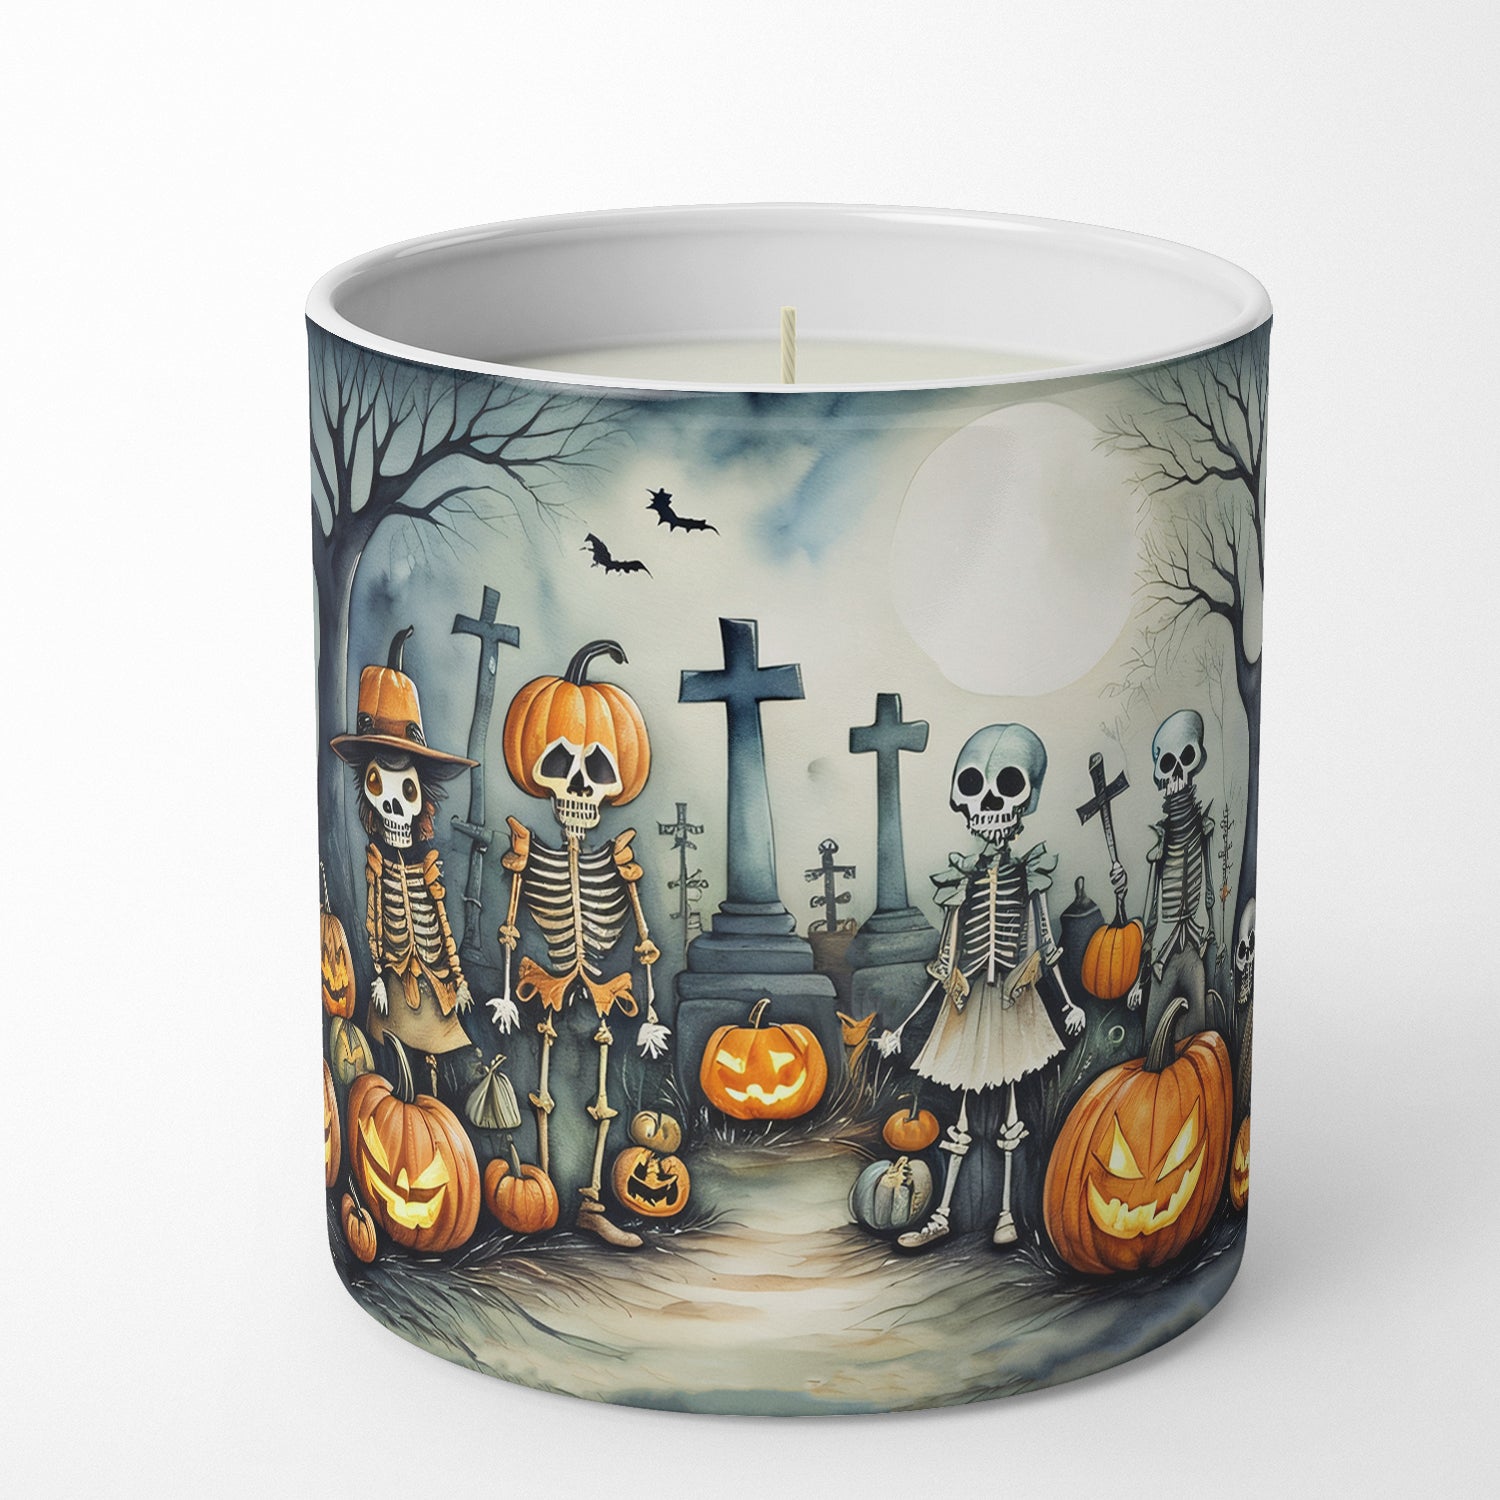 Calacas Skeletons Spooky Halloween Decorative Soy Candle